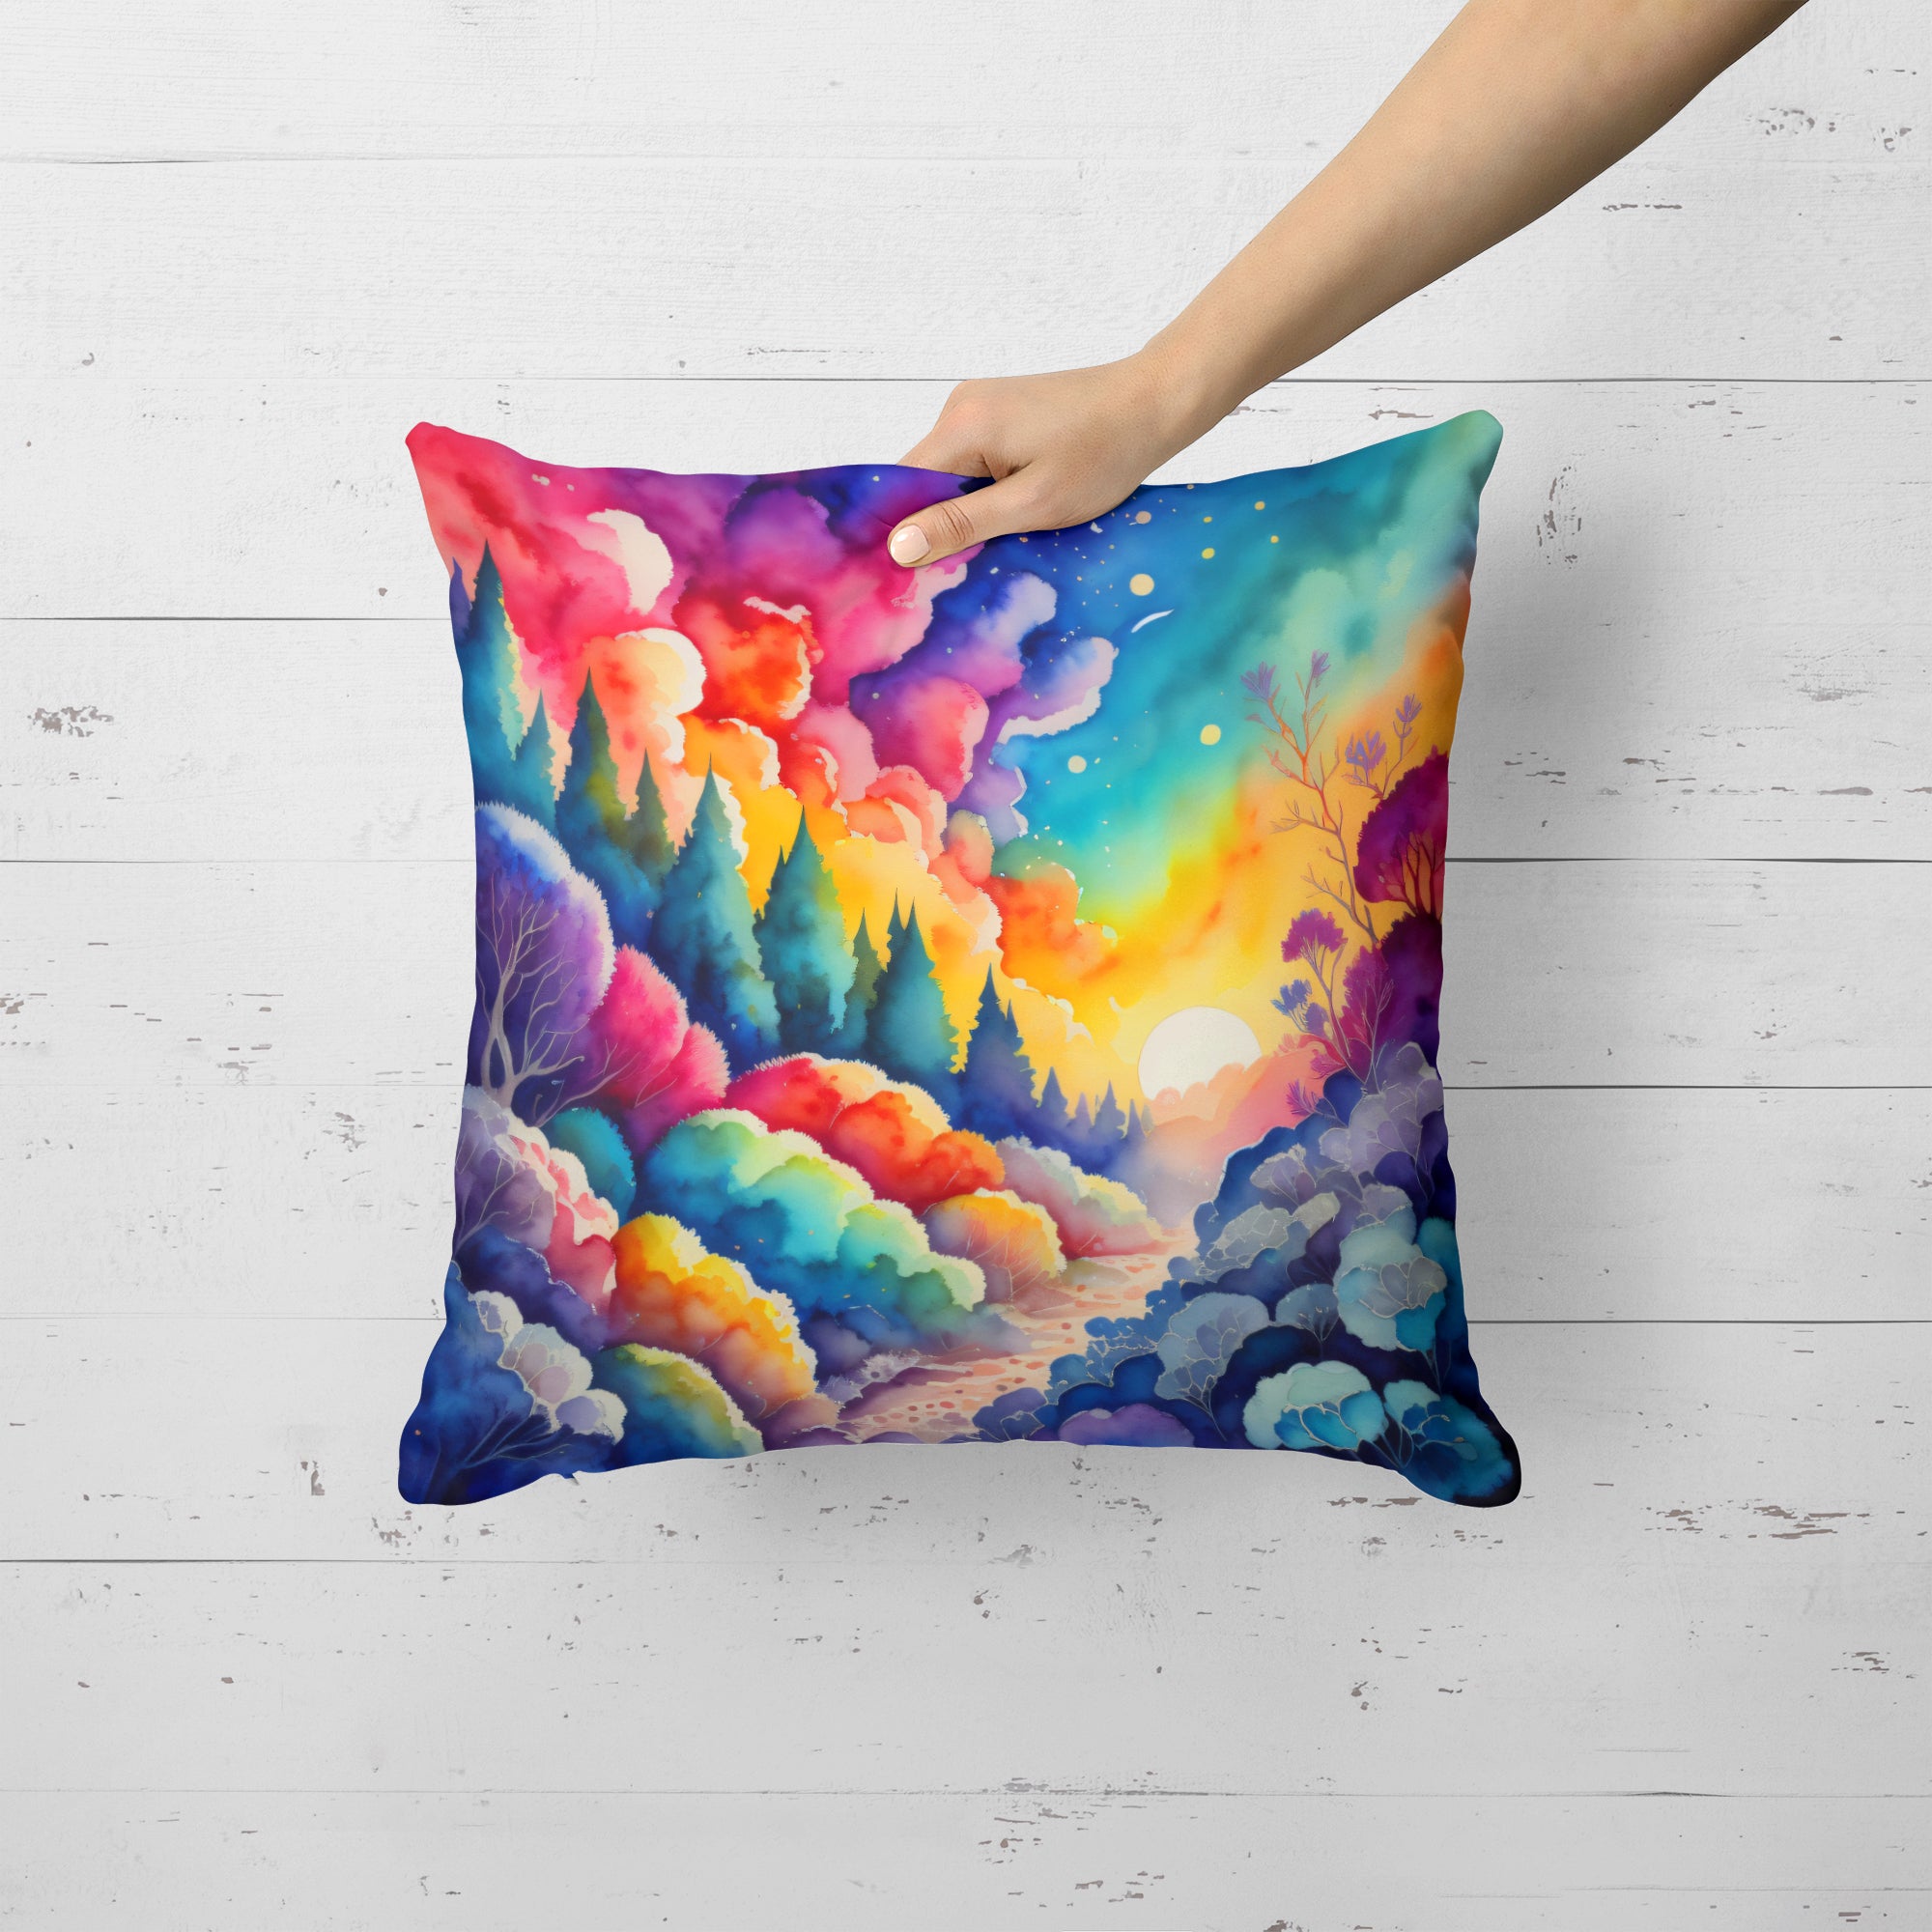 Buy this Colorful Dusty Miller Fabric Decorative Pillow